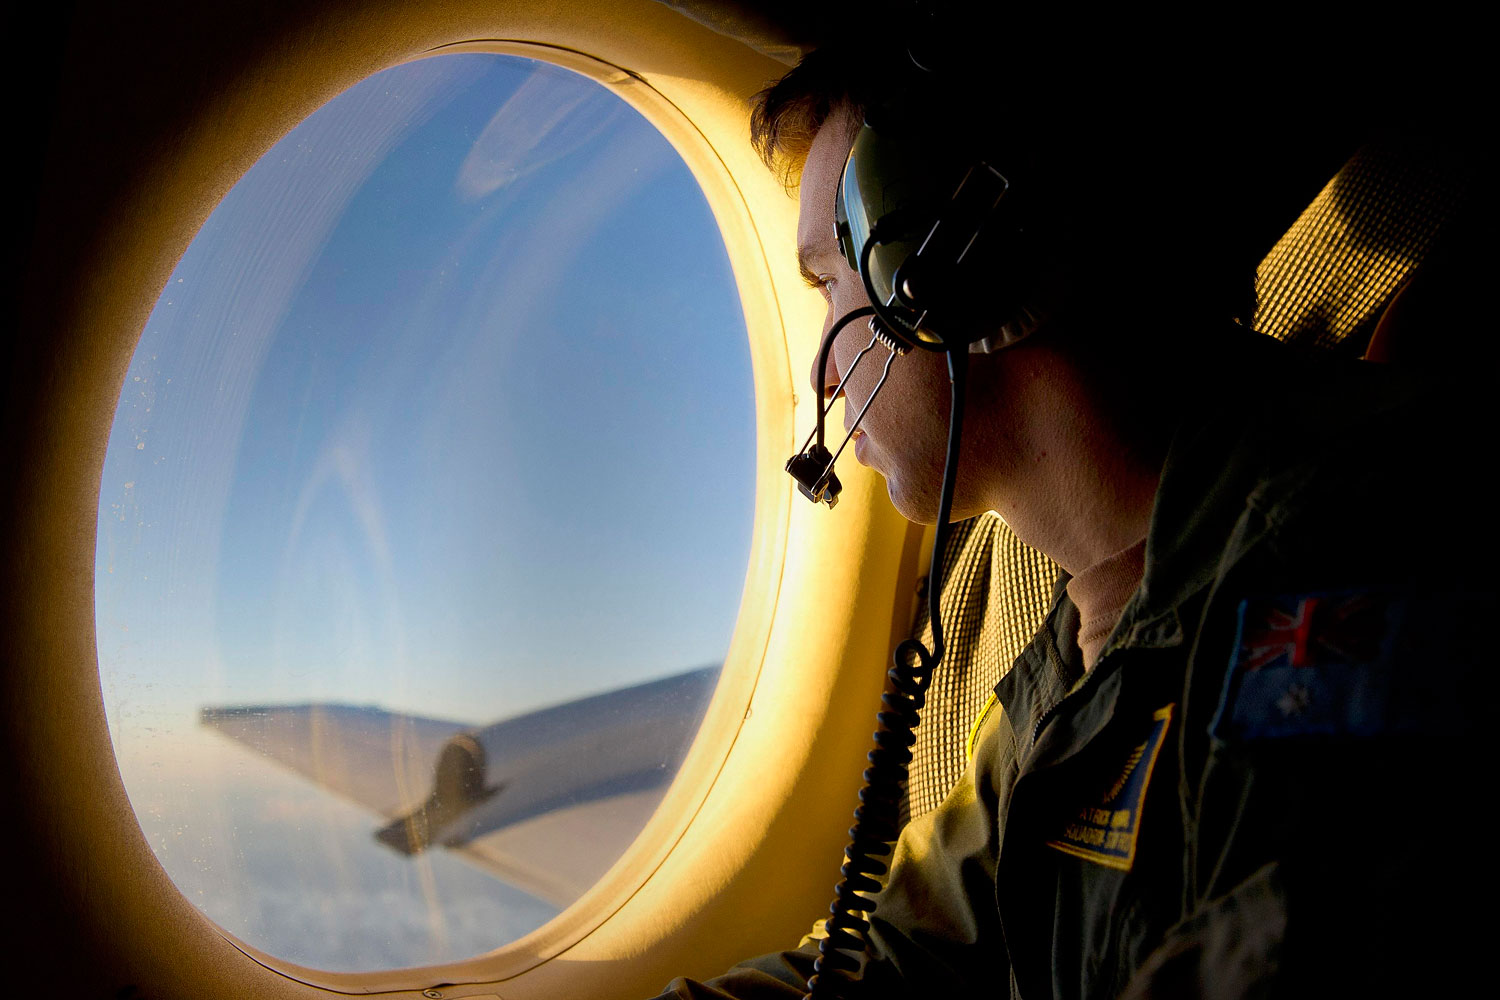 Royal Australian Air Force (RAAF) Airborne Electronics Analyst Sergeant Patrick Manser looks out of an observation window aboard a RAAF AP-3C Orion aircraft during the search in the southern Indian Ocean for debris from the missing Malaysian Airlines flight MH370 in this picture released by the Australian Defence Force April 1, 2014.